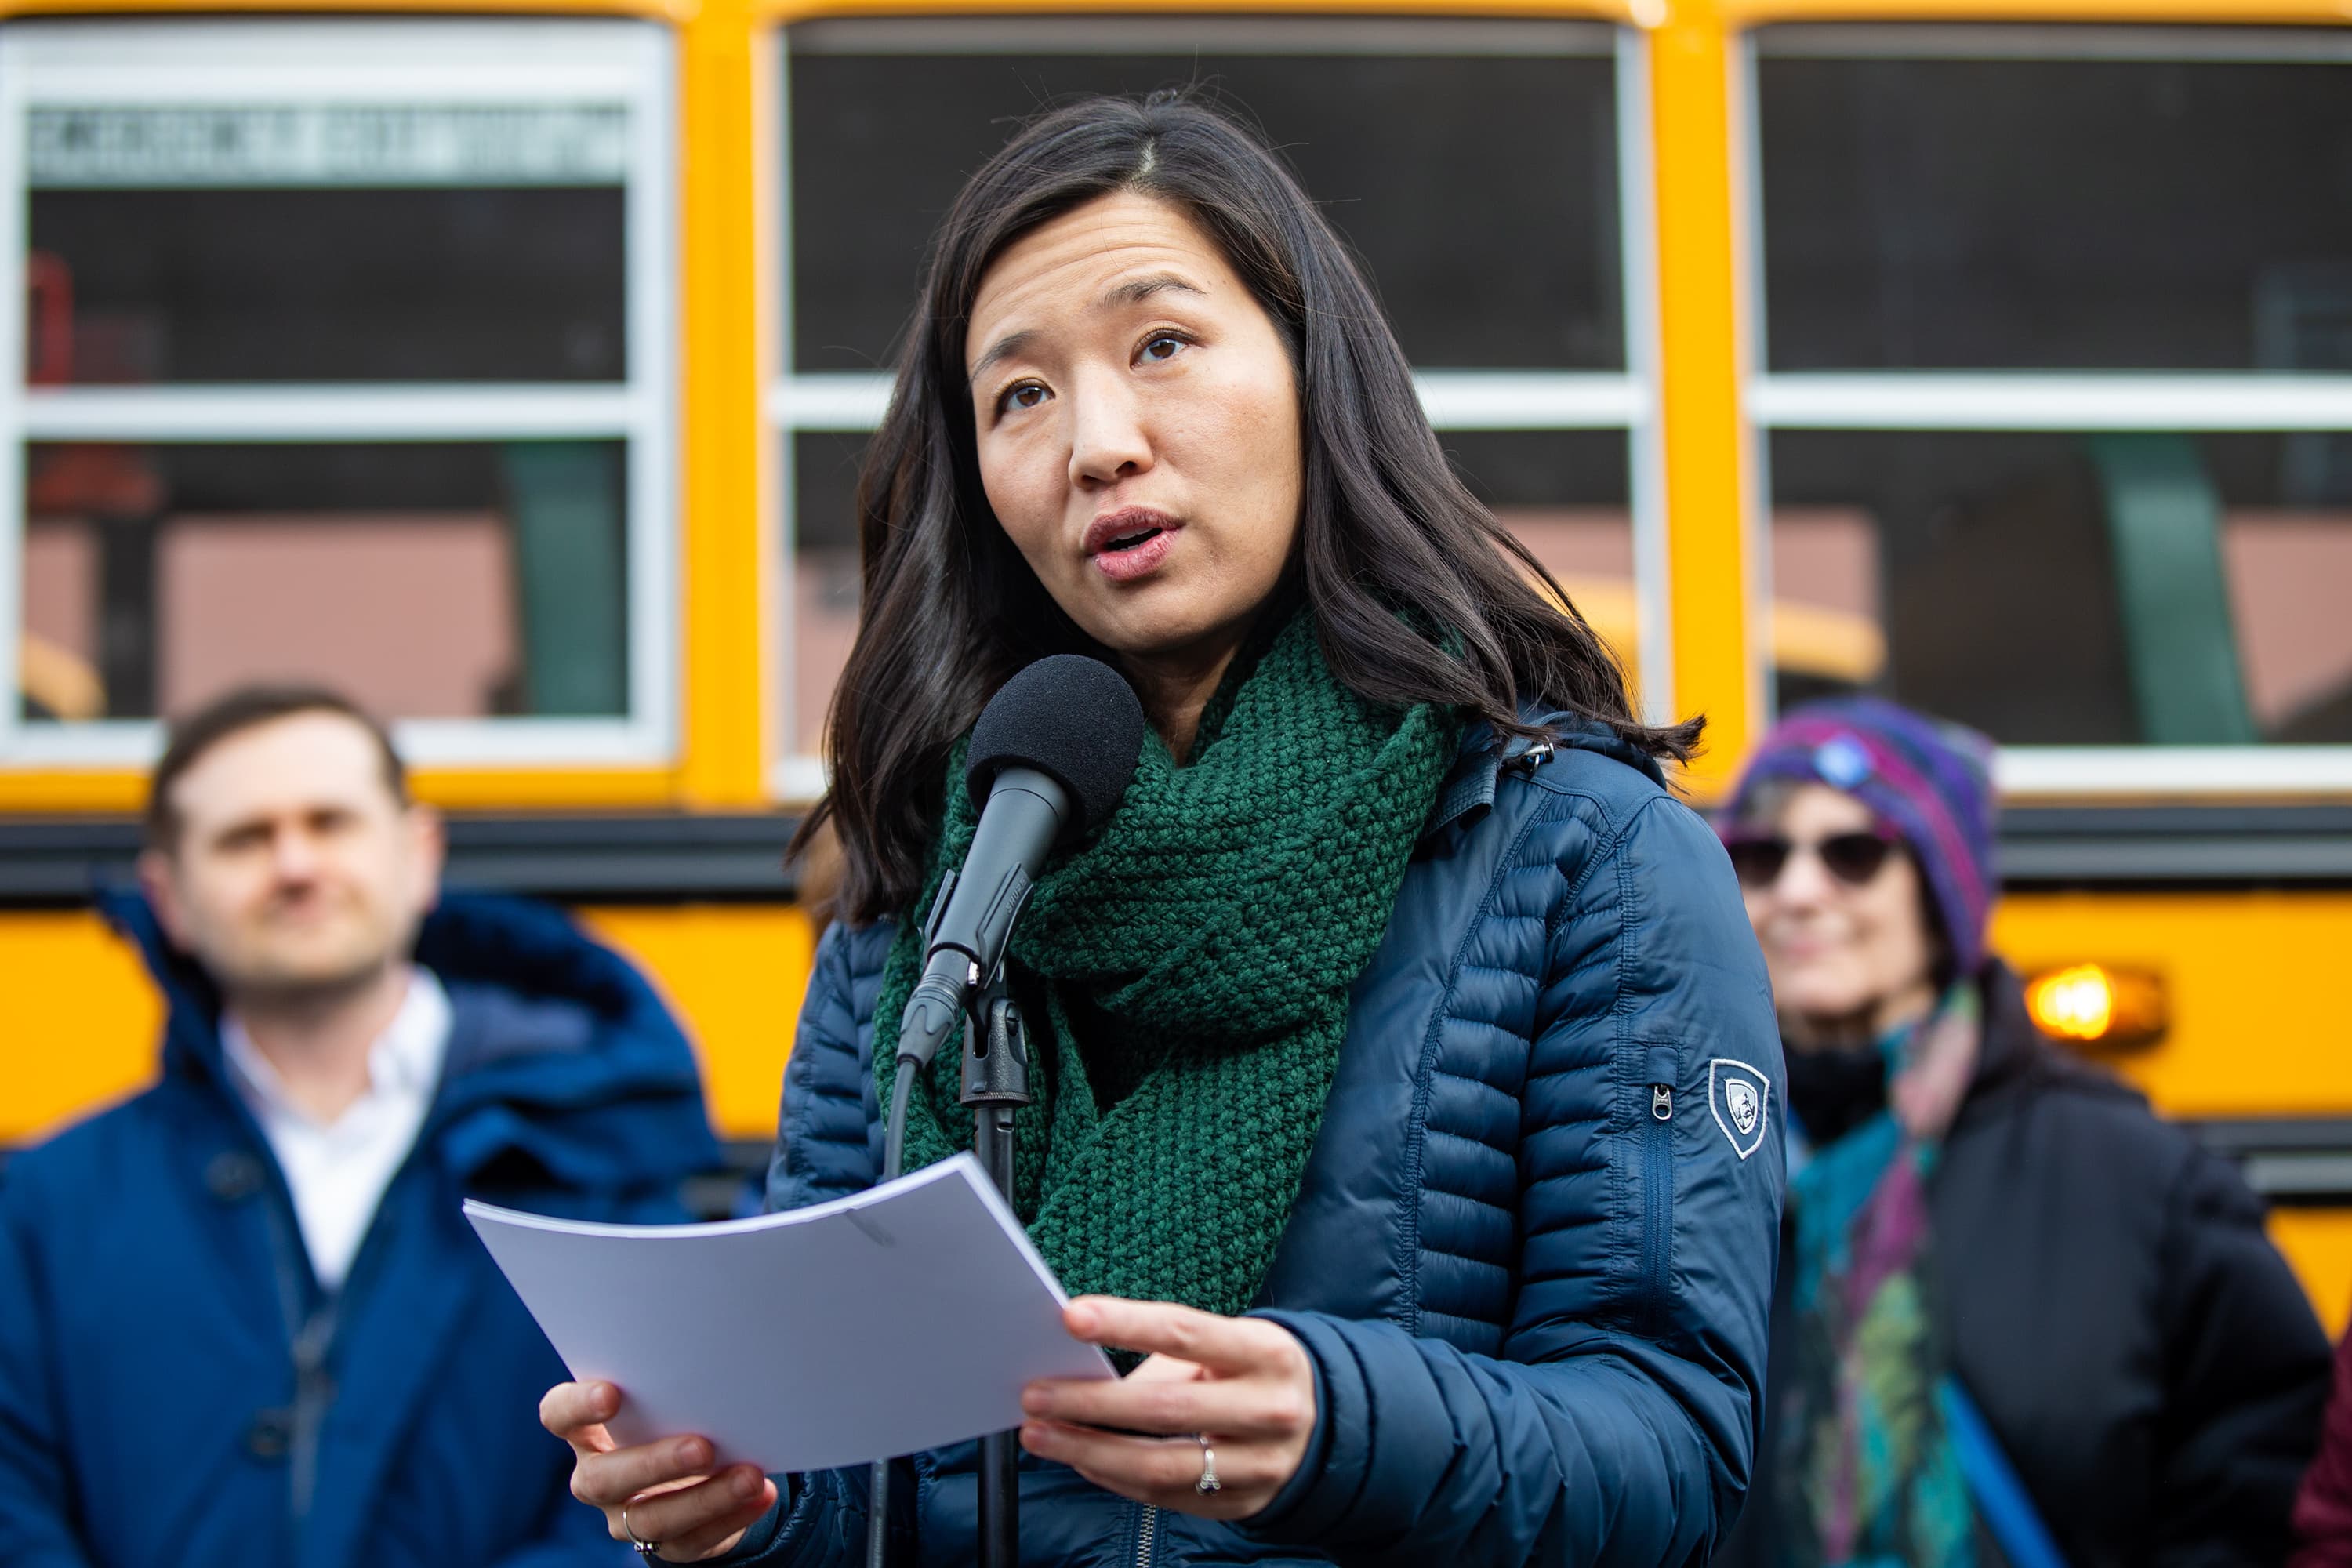 Mayor Michelle Wu announces the addition of 20 electric school buses to the Boston Public Schools' fleet during a press conference at the Readville Station Bus Yard in Hyde Park. (Jesse Costa/WBUR)